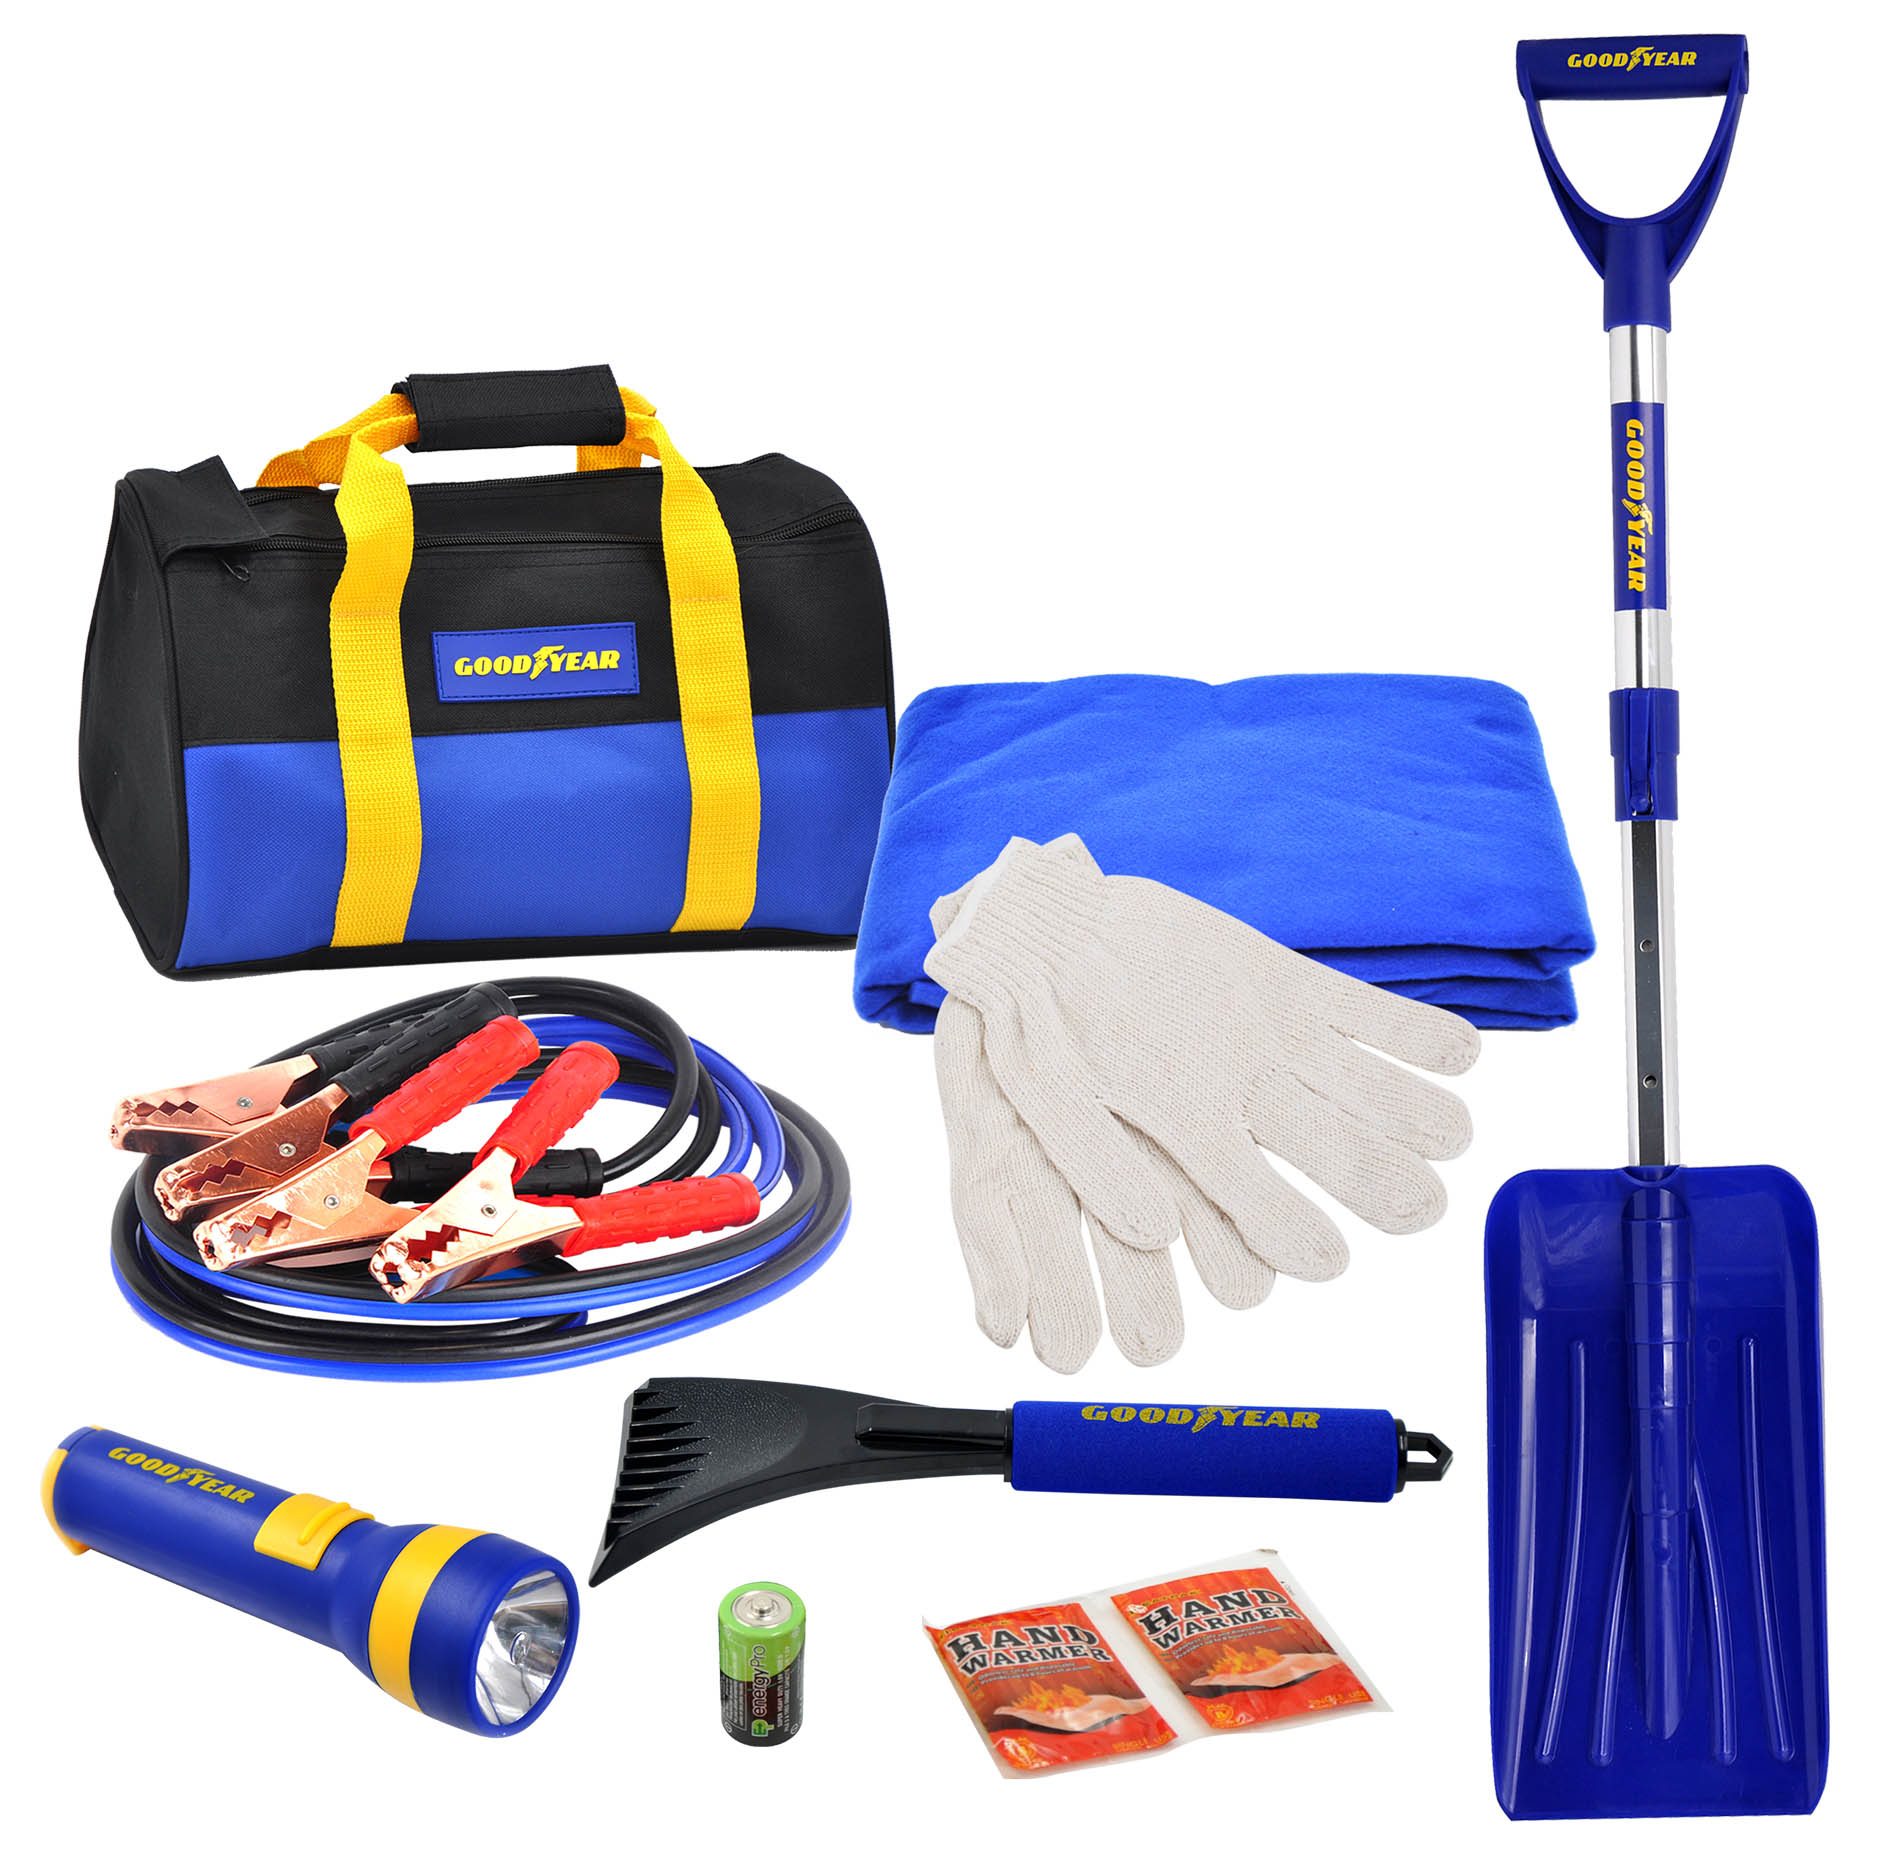 Goodyear Gy3005 Travel Safety Kit